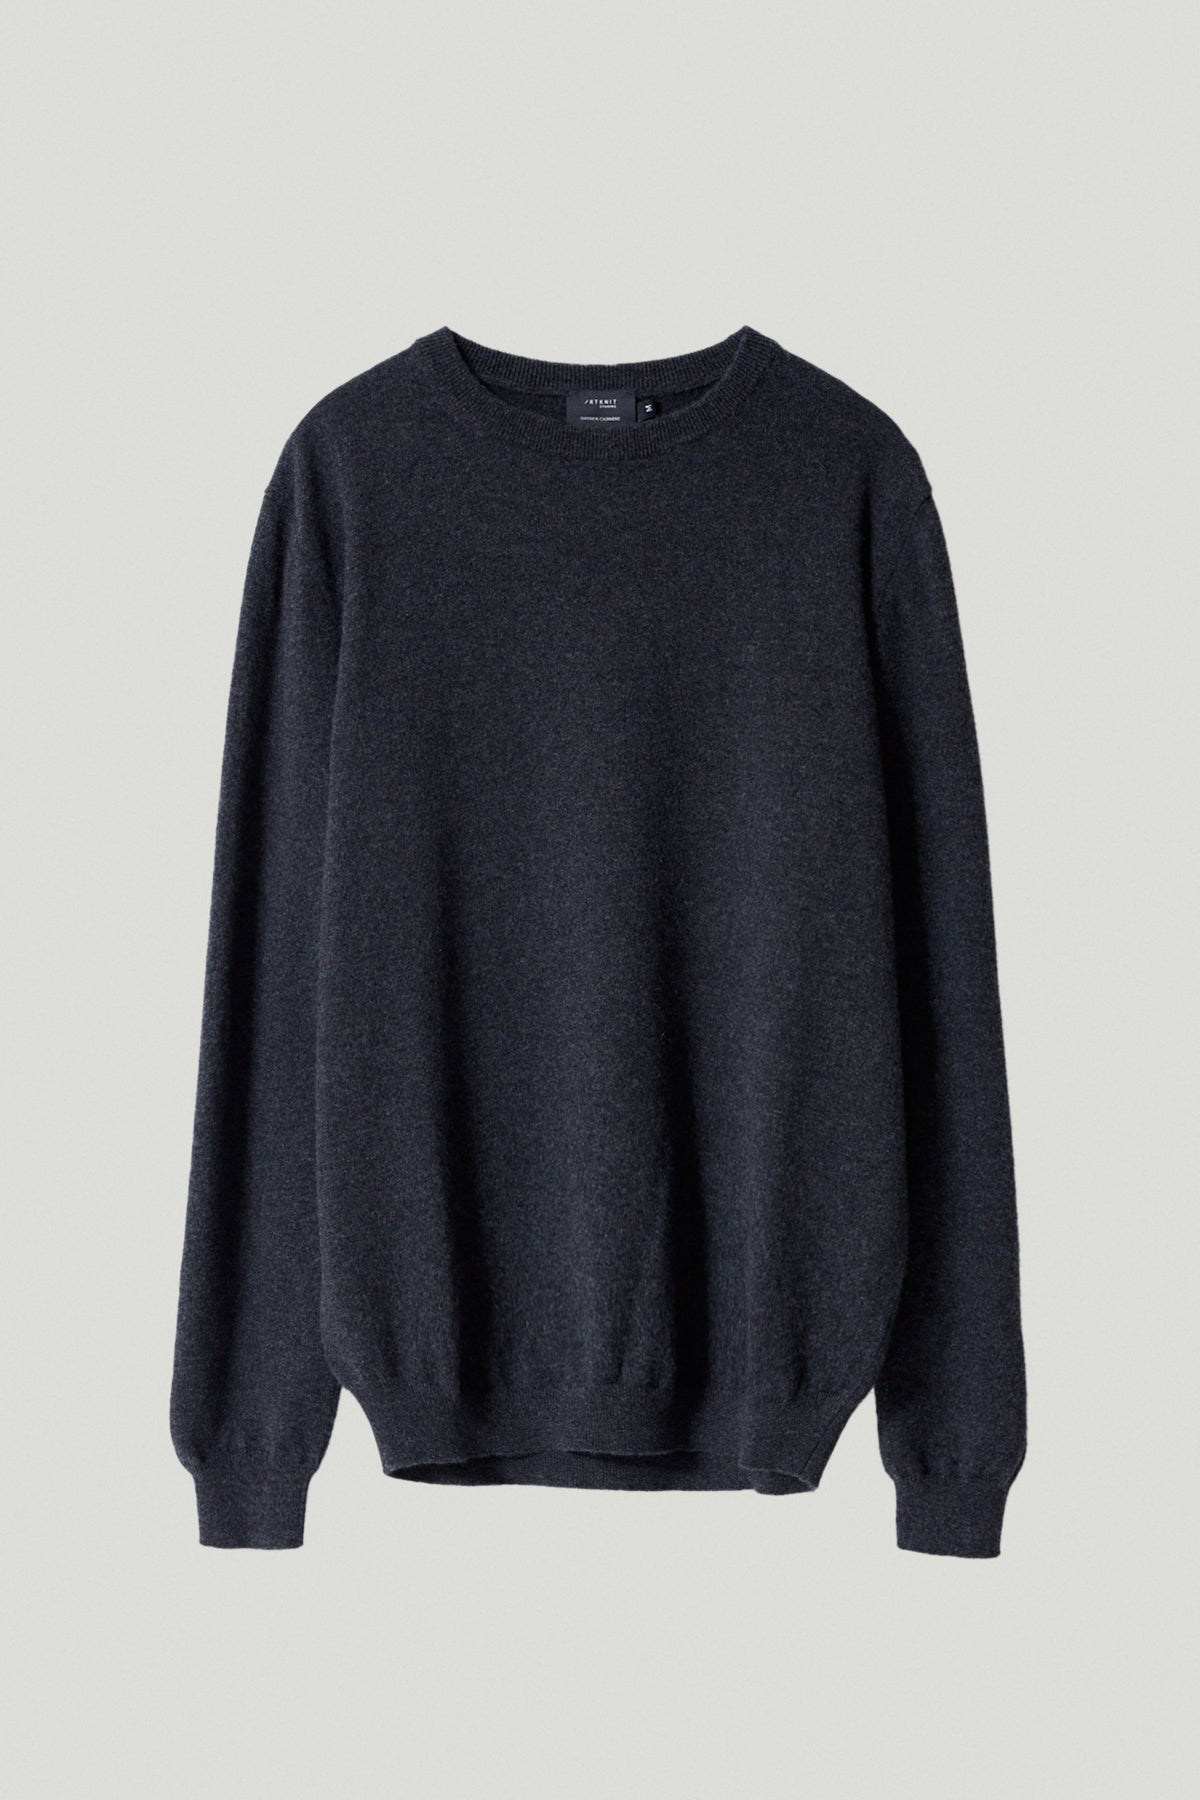 Charcoal Grey | The Superior Cashmere Classic Round-Neck